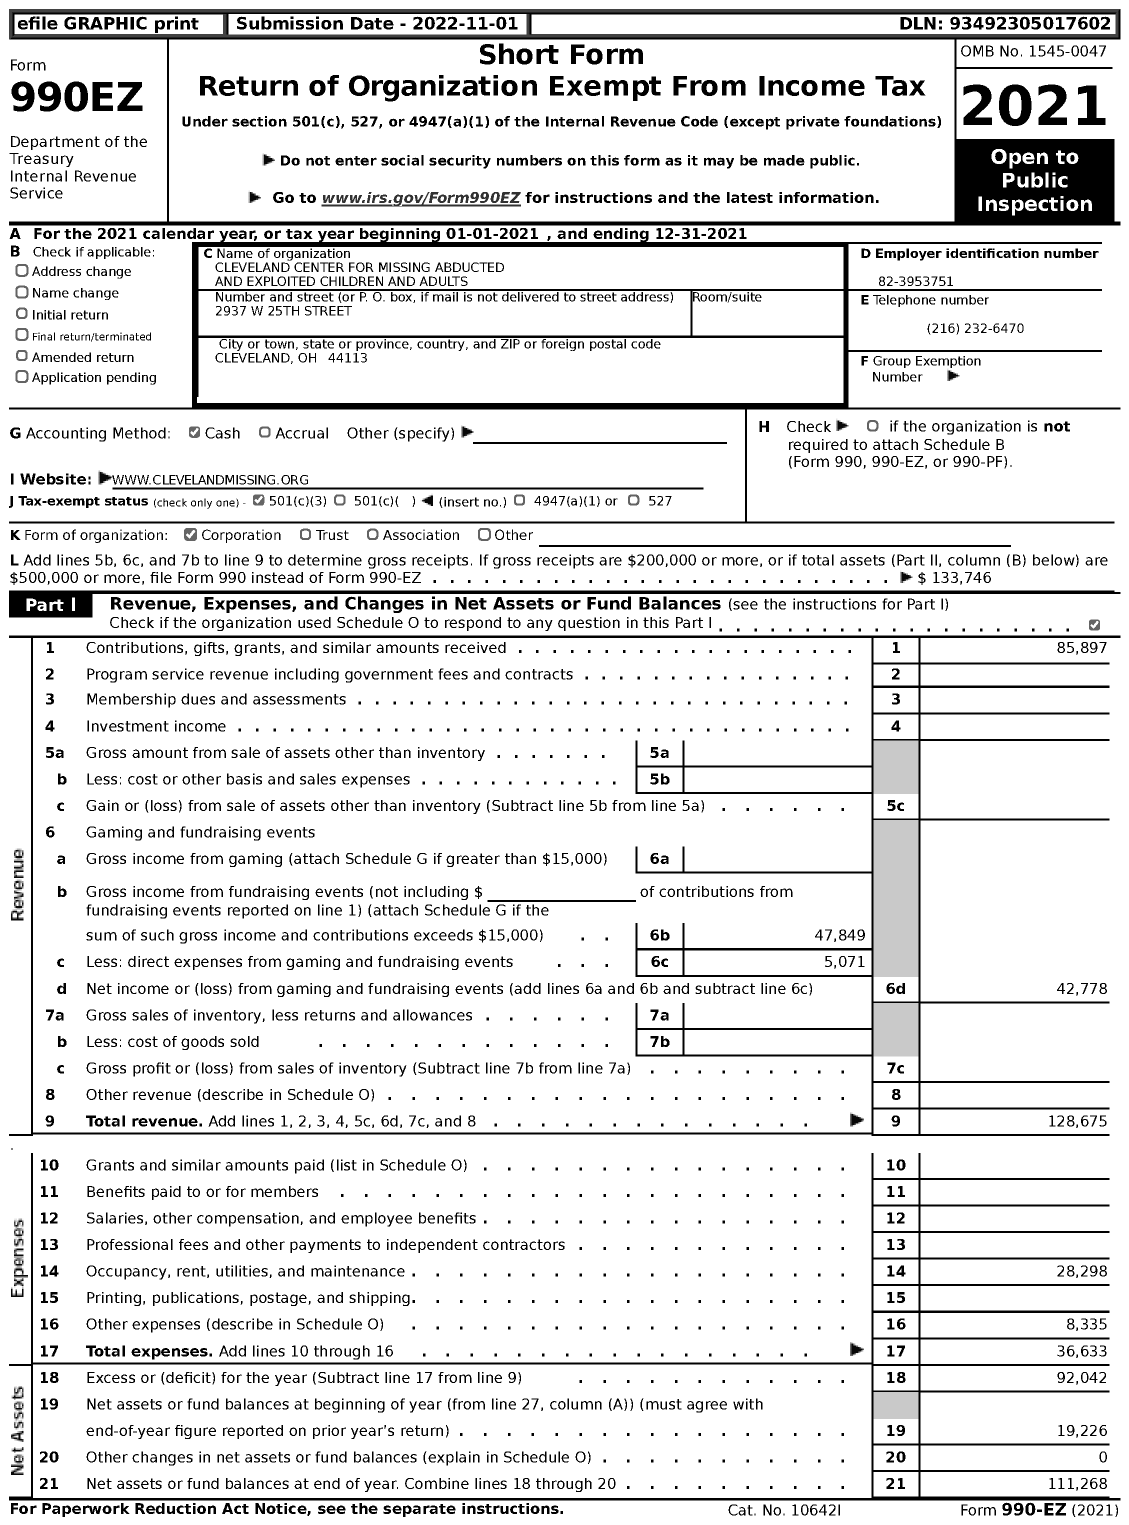 Image of first page of 2021 Form 990EZ for Cleveland Center for Missing Abducted and Exploited Children and Adults